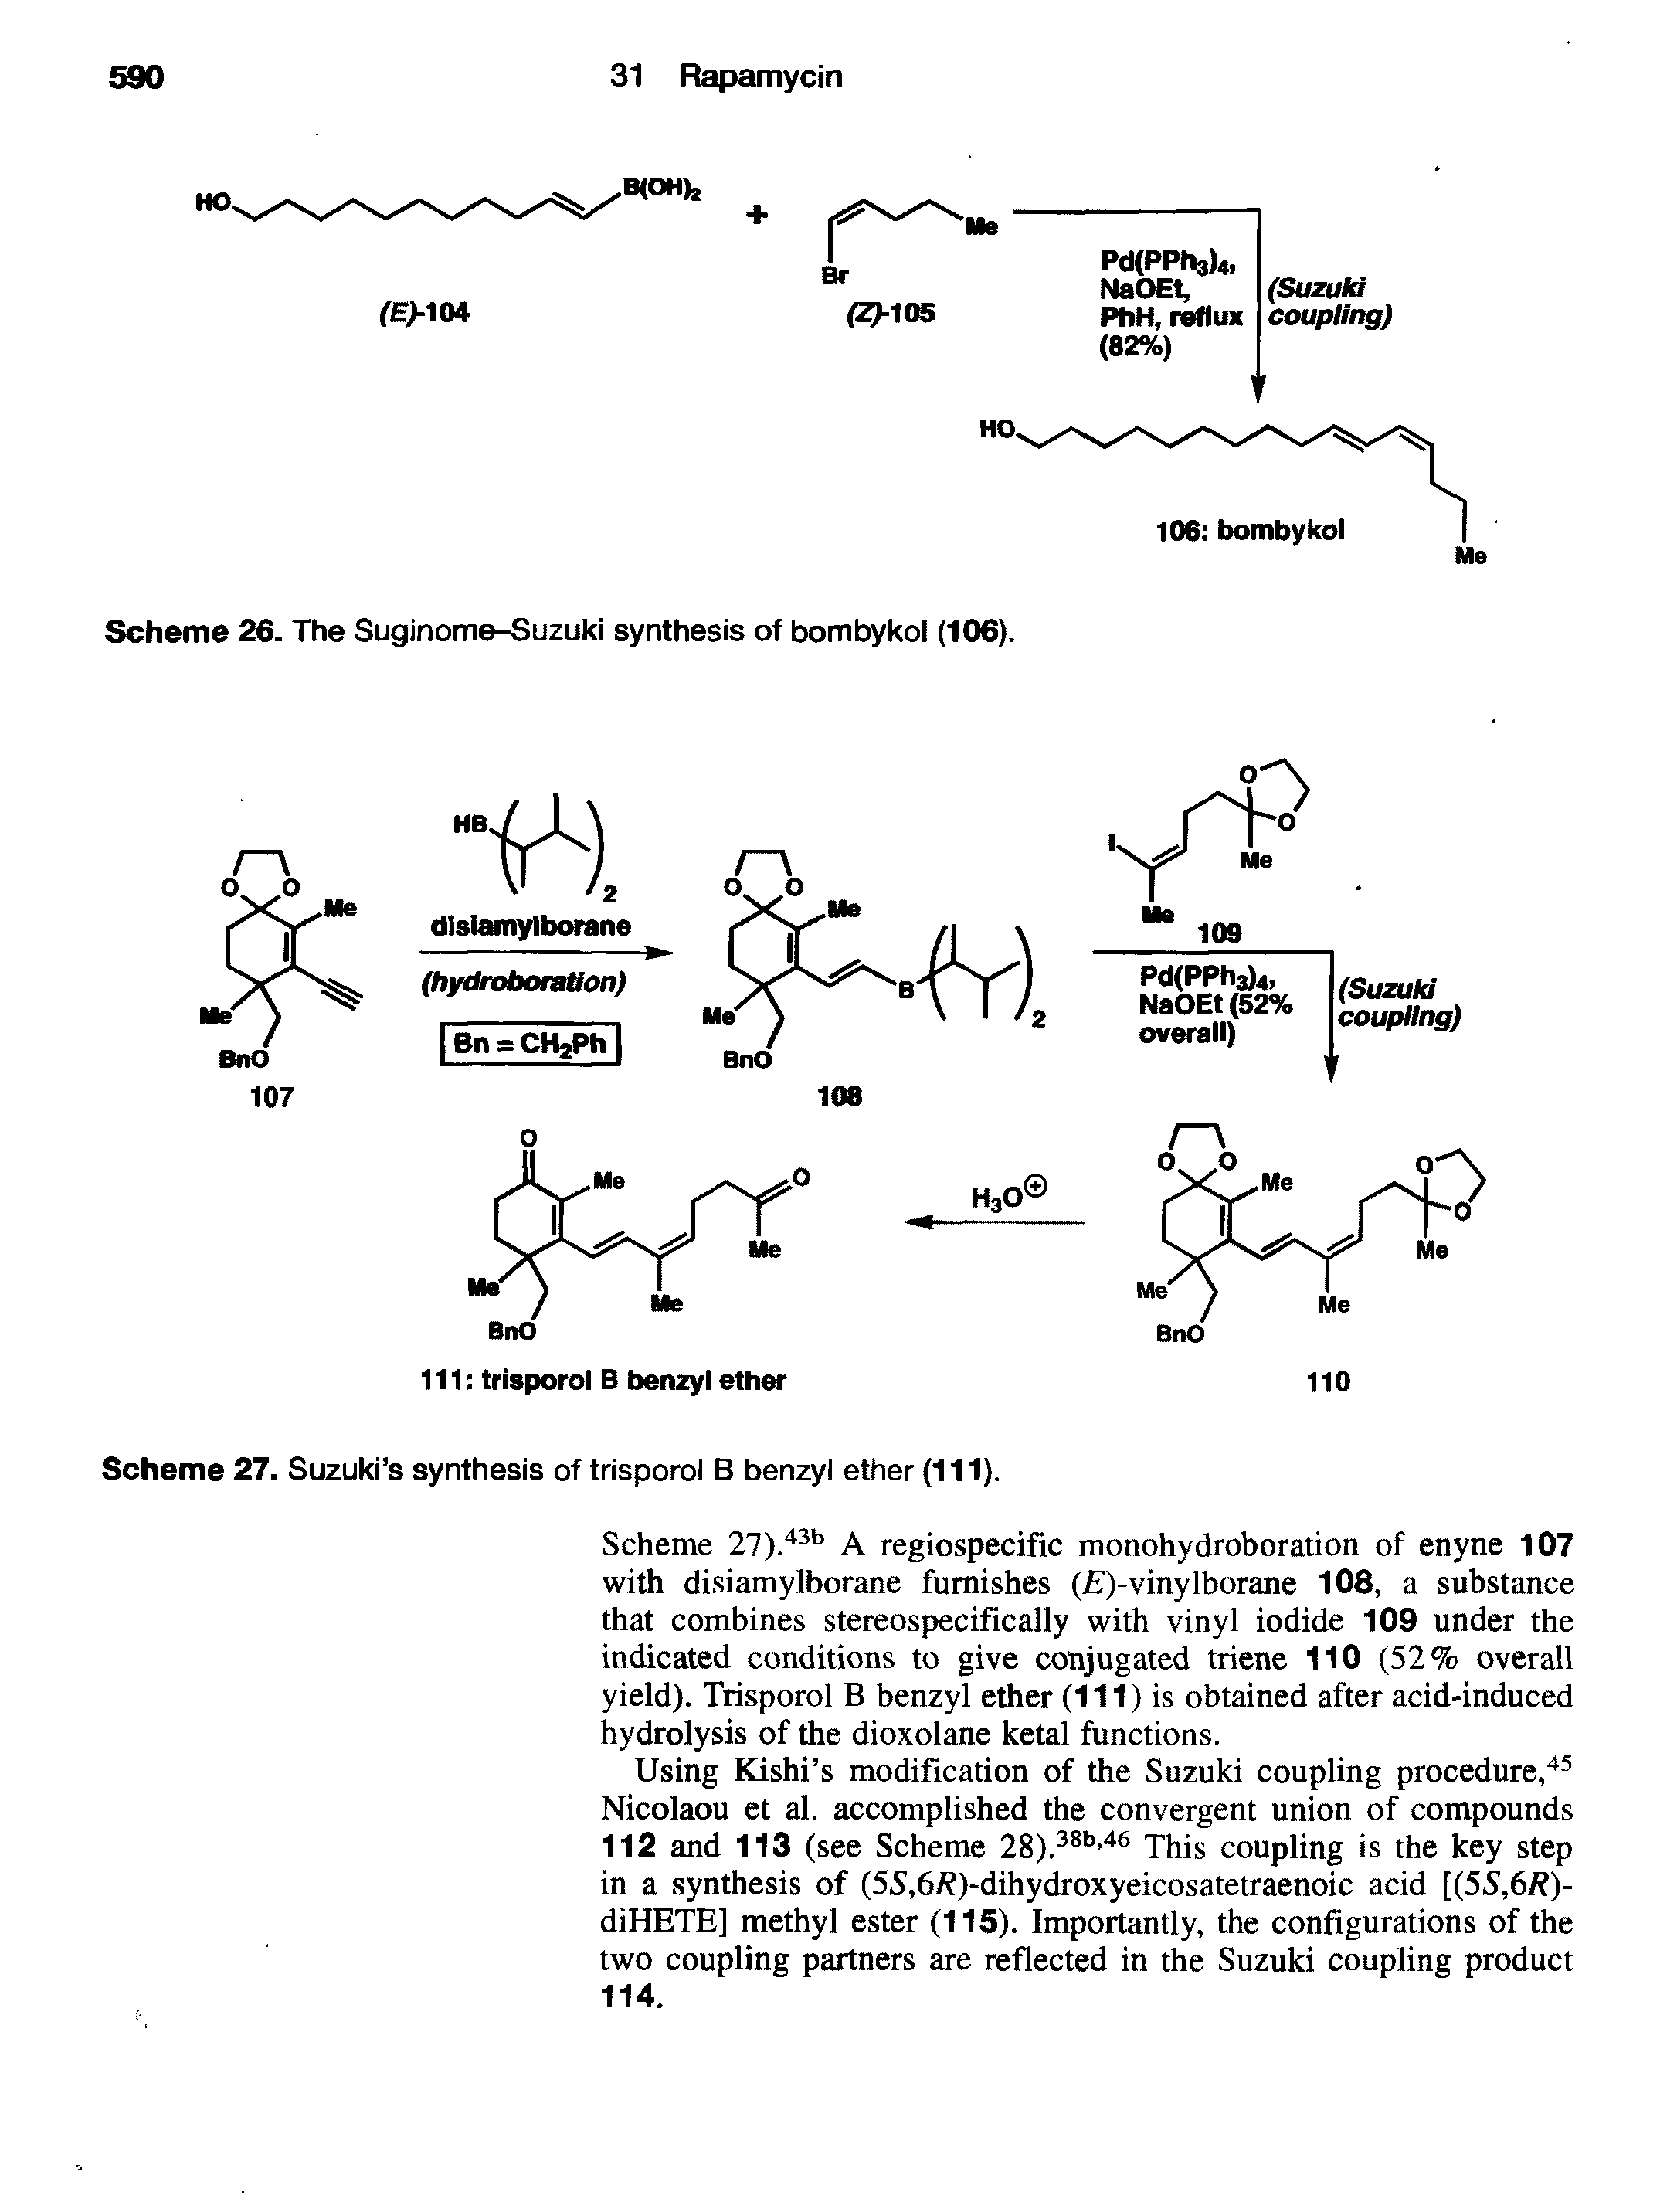 Scheme 27).43b A regiospecific monohydroboration of enyne 107 with disiamylborane furnishes (A)-vinylborane 108, a substance that combines stereospecifically with vinyl iodide 109 under the indicated conditions to give conjugated triene 110 (52% overall yield). Trisporol B benzyl ether (111) is obtained after acid-induced hydrolysis of the dioxolane ketal functions.